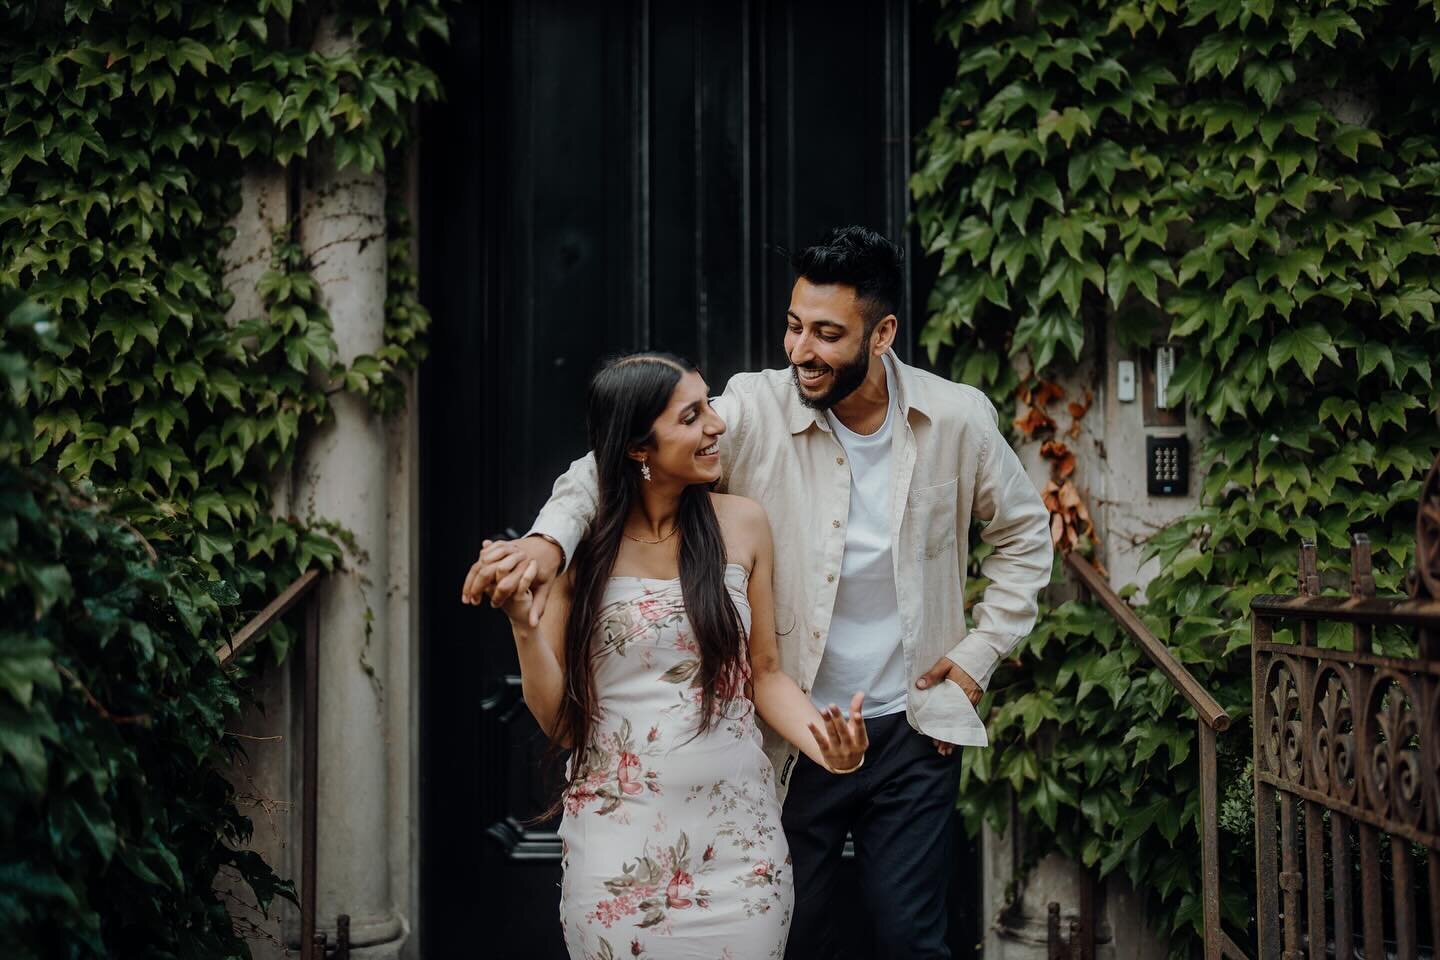 Here&rsquo;s a sneak peek of Amrit &amp; Lekha at this beautiful location in Heart of Auckland city. Had a incredible time, the fun was endless and had them laughing so much. I&rsquo;m eagerly looking forward to your big day guys! 

www.koukiphotogra